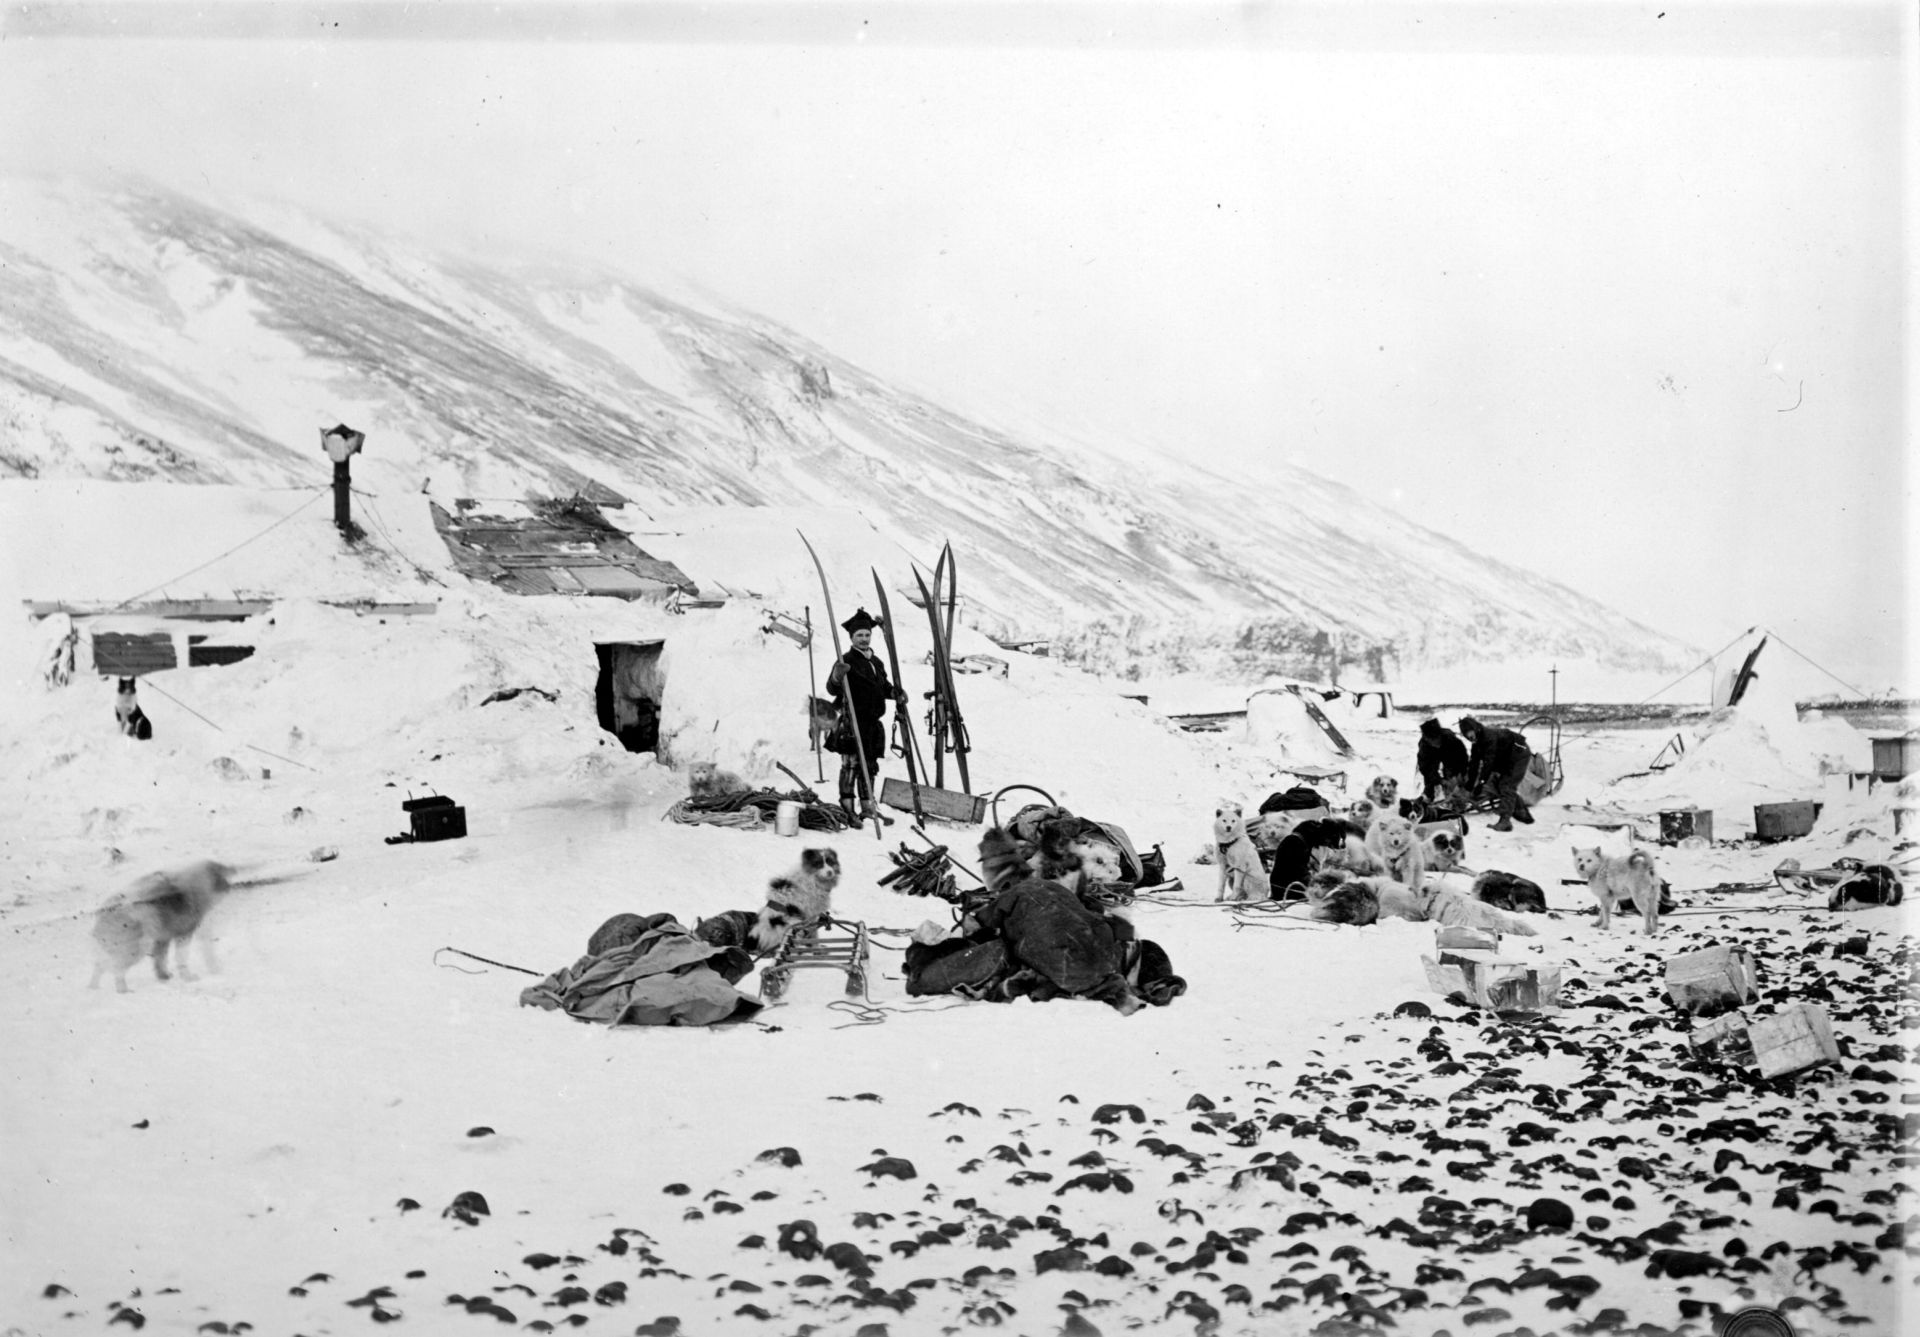 The huts near the end of winter 1899 with Savio by the skis and Must and Evans in the background.